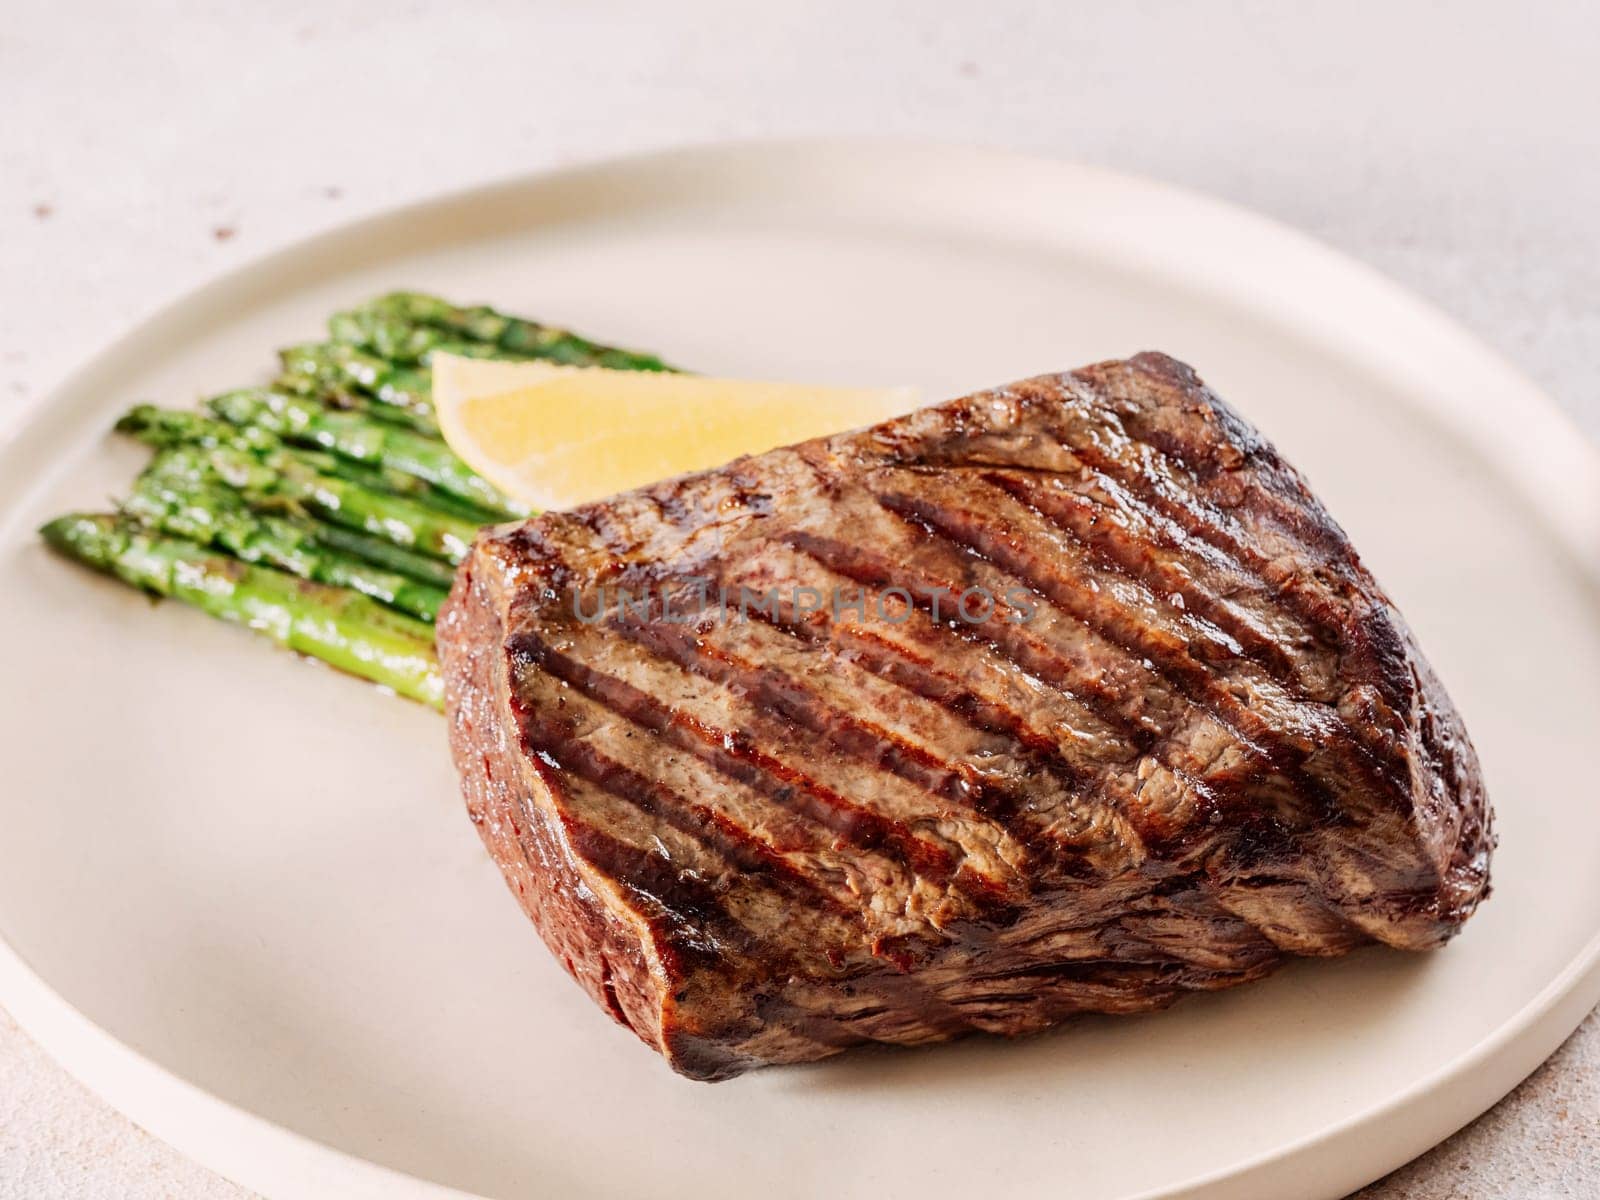 Grilled meat steak on plate with lemon and asparagus on white table background. Food and cuisine concept.